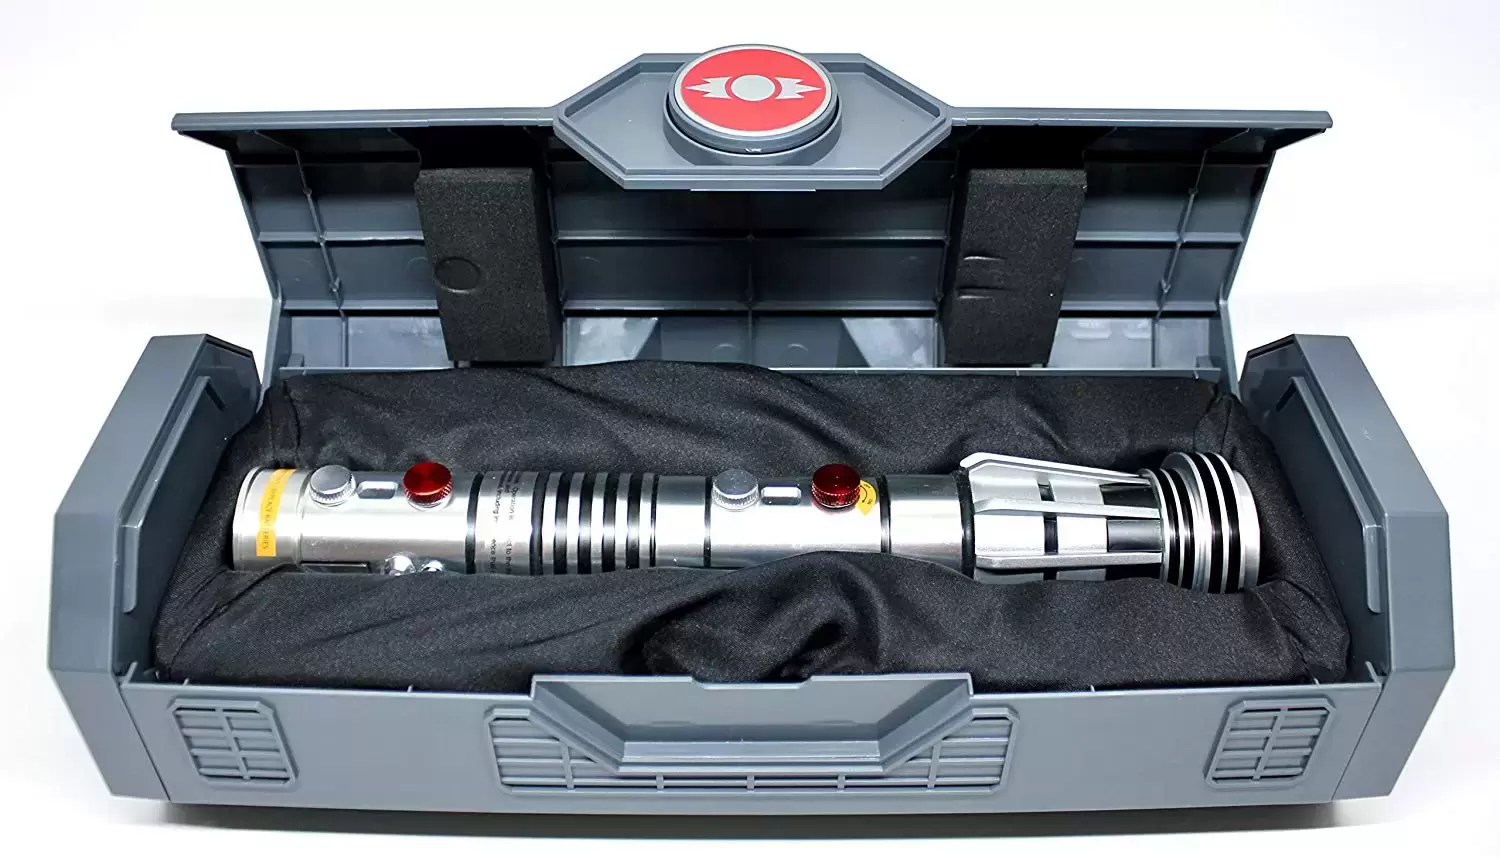 Lightsabers And Roleplay Items - Legacy Lightsaber - Darth Maul Lightsaber